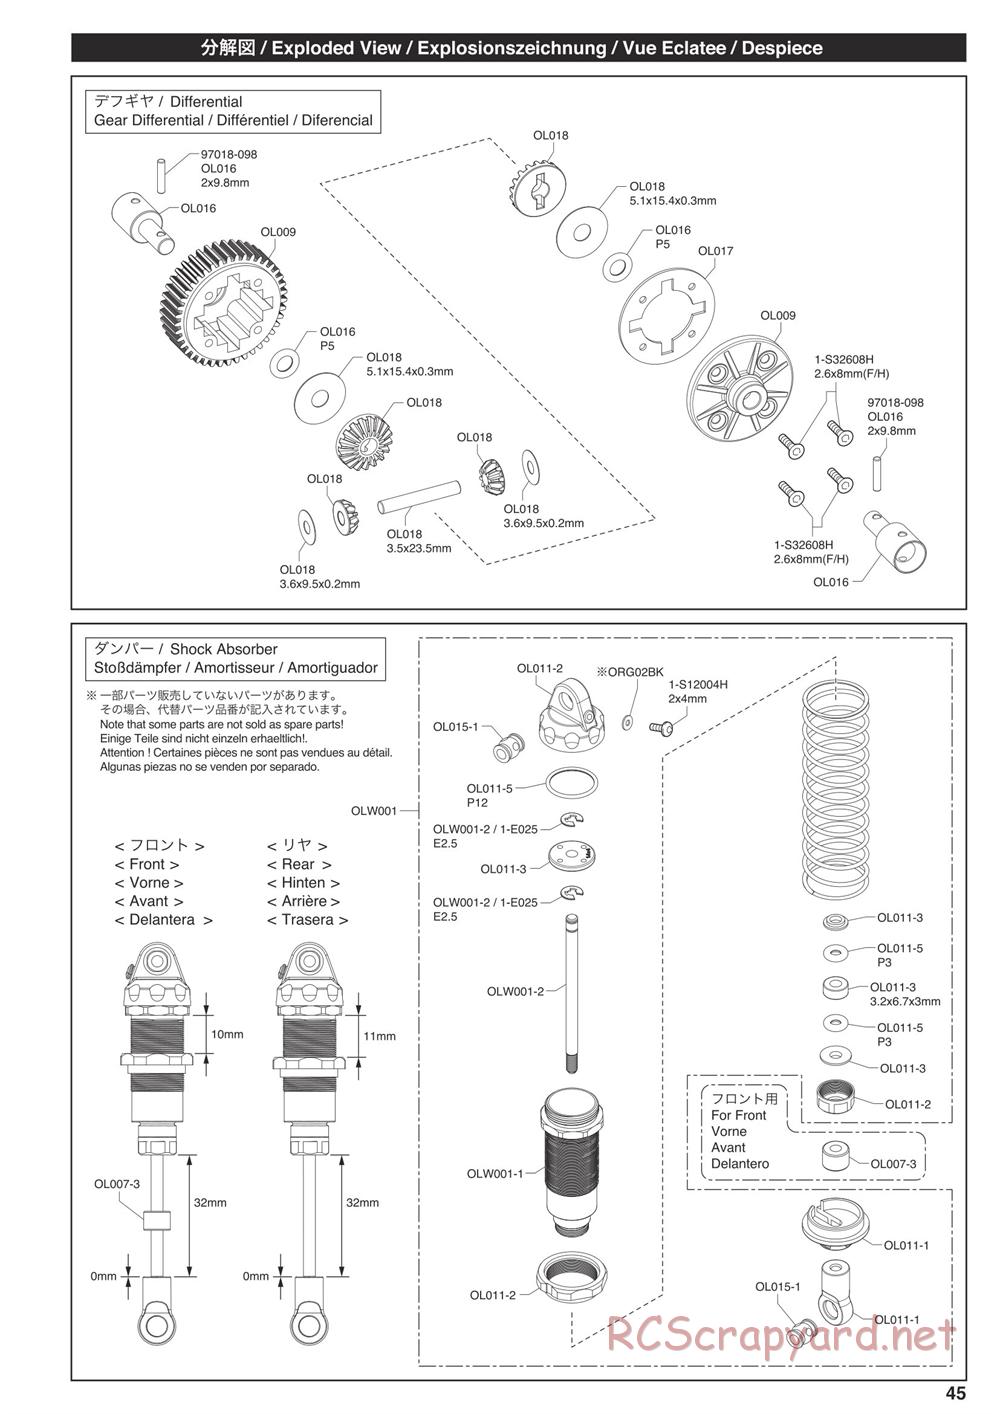 Kyosho - Outlaw Rampage Pro - Exploded Views - Page 3